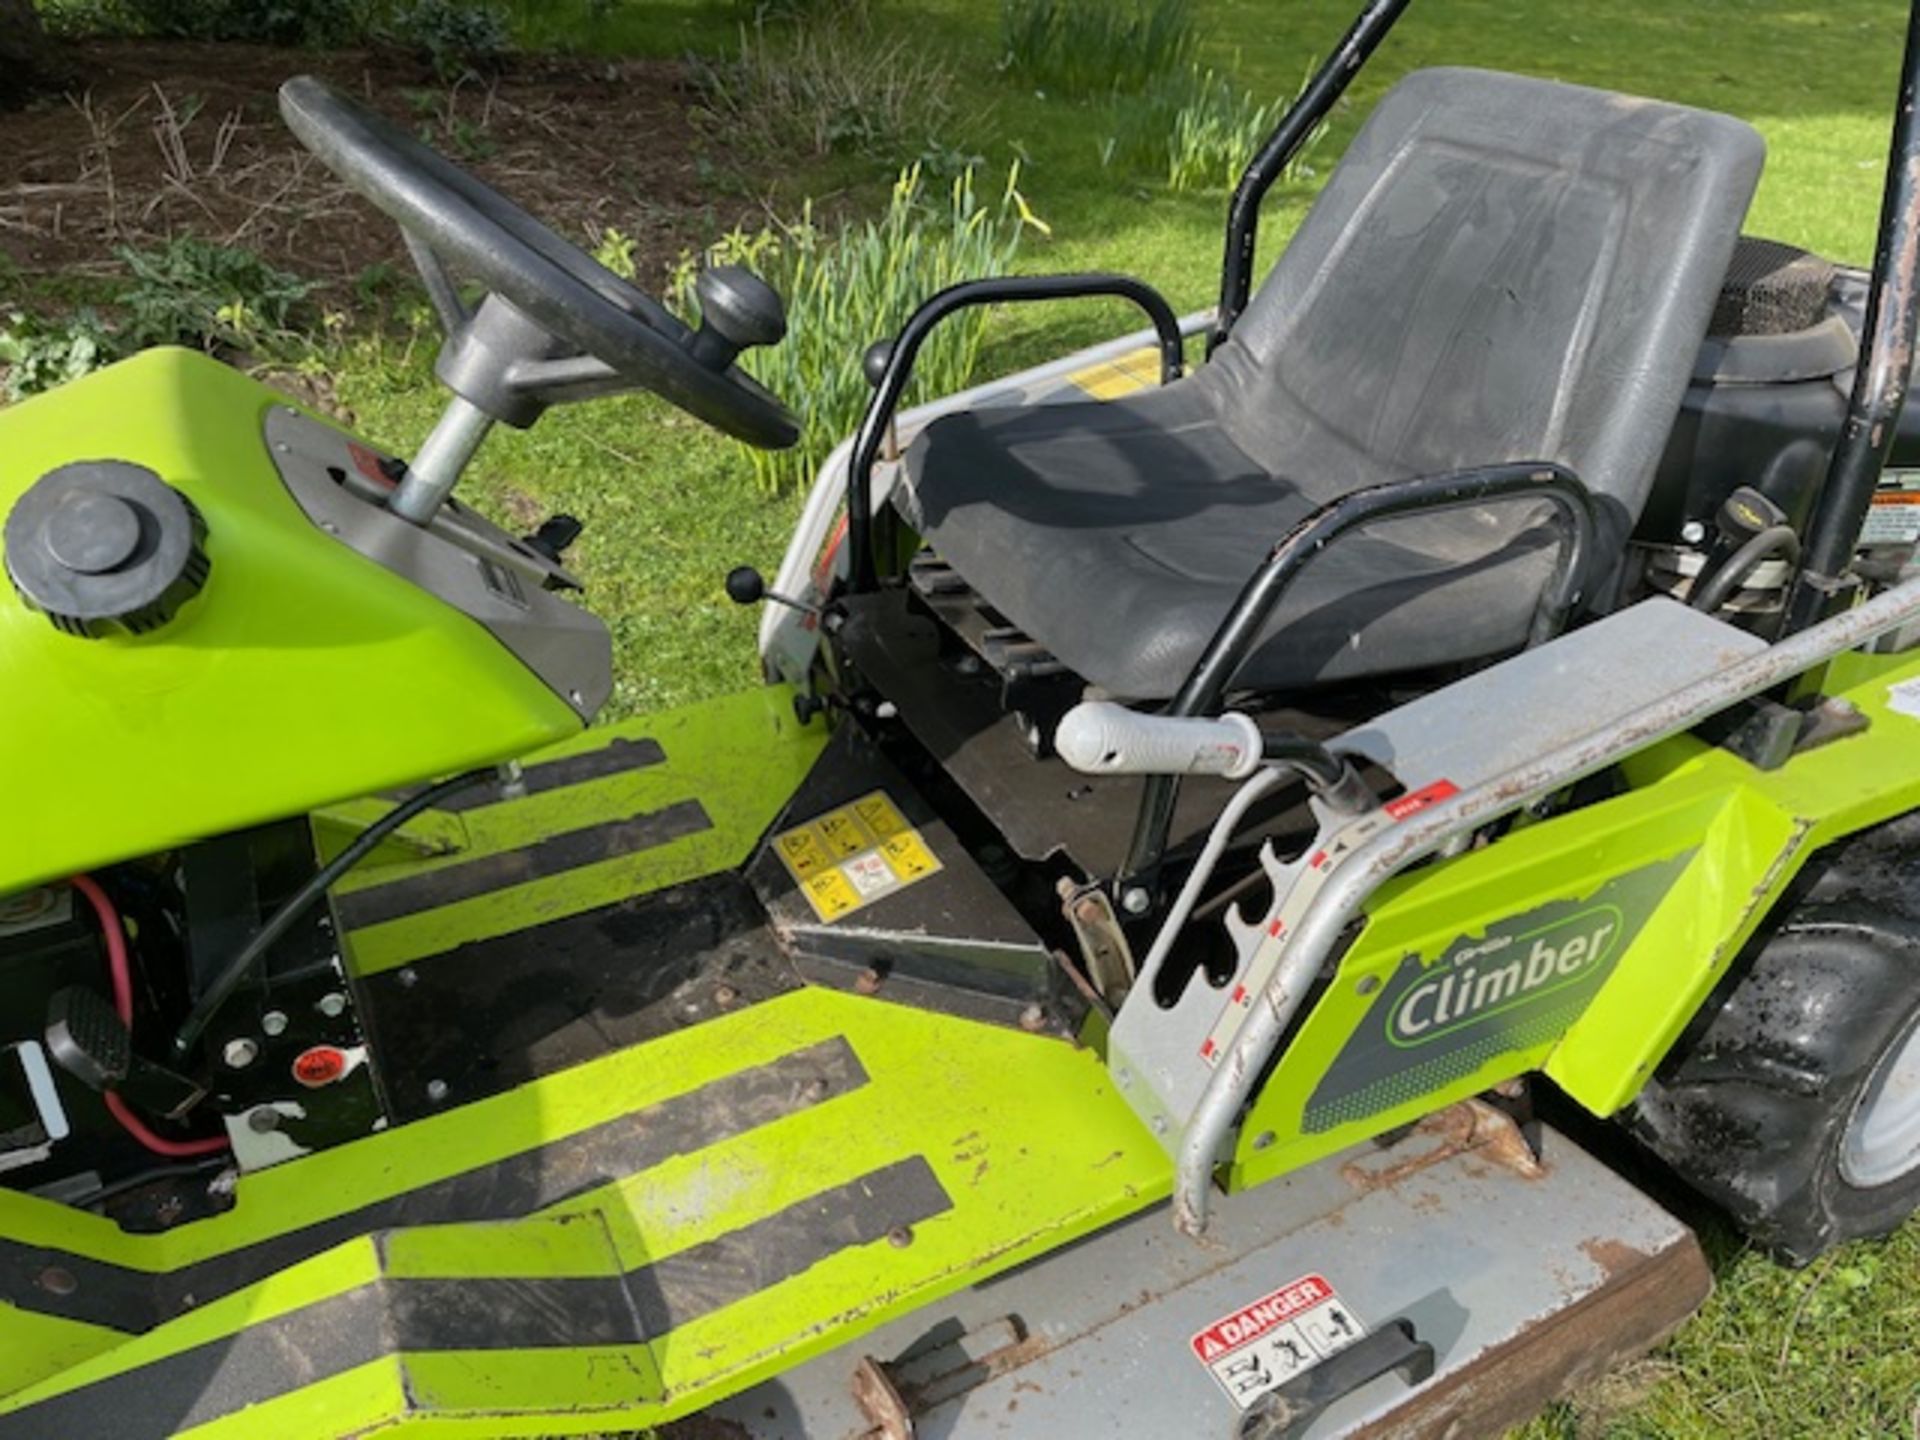 2007, GRILLO CLIMBER 9.21 SERIES RIDE ON MOWER - Image 3 of 10